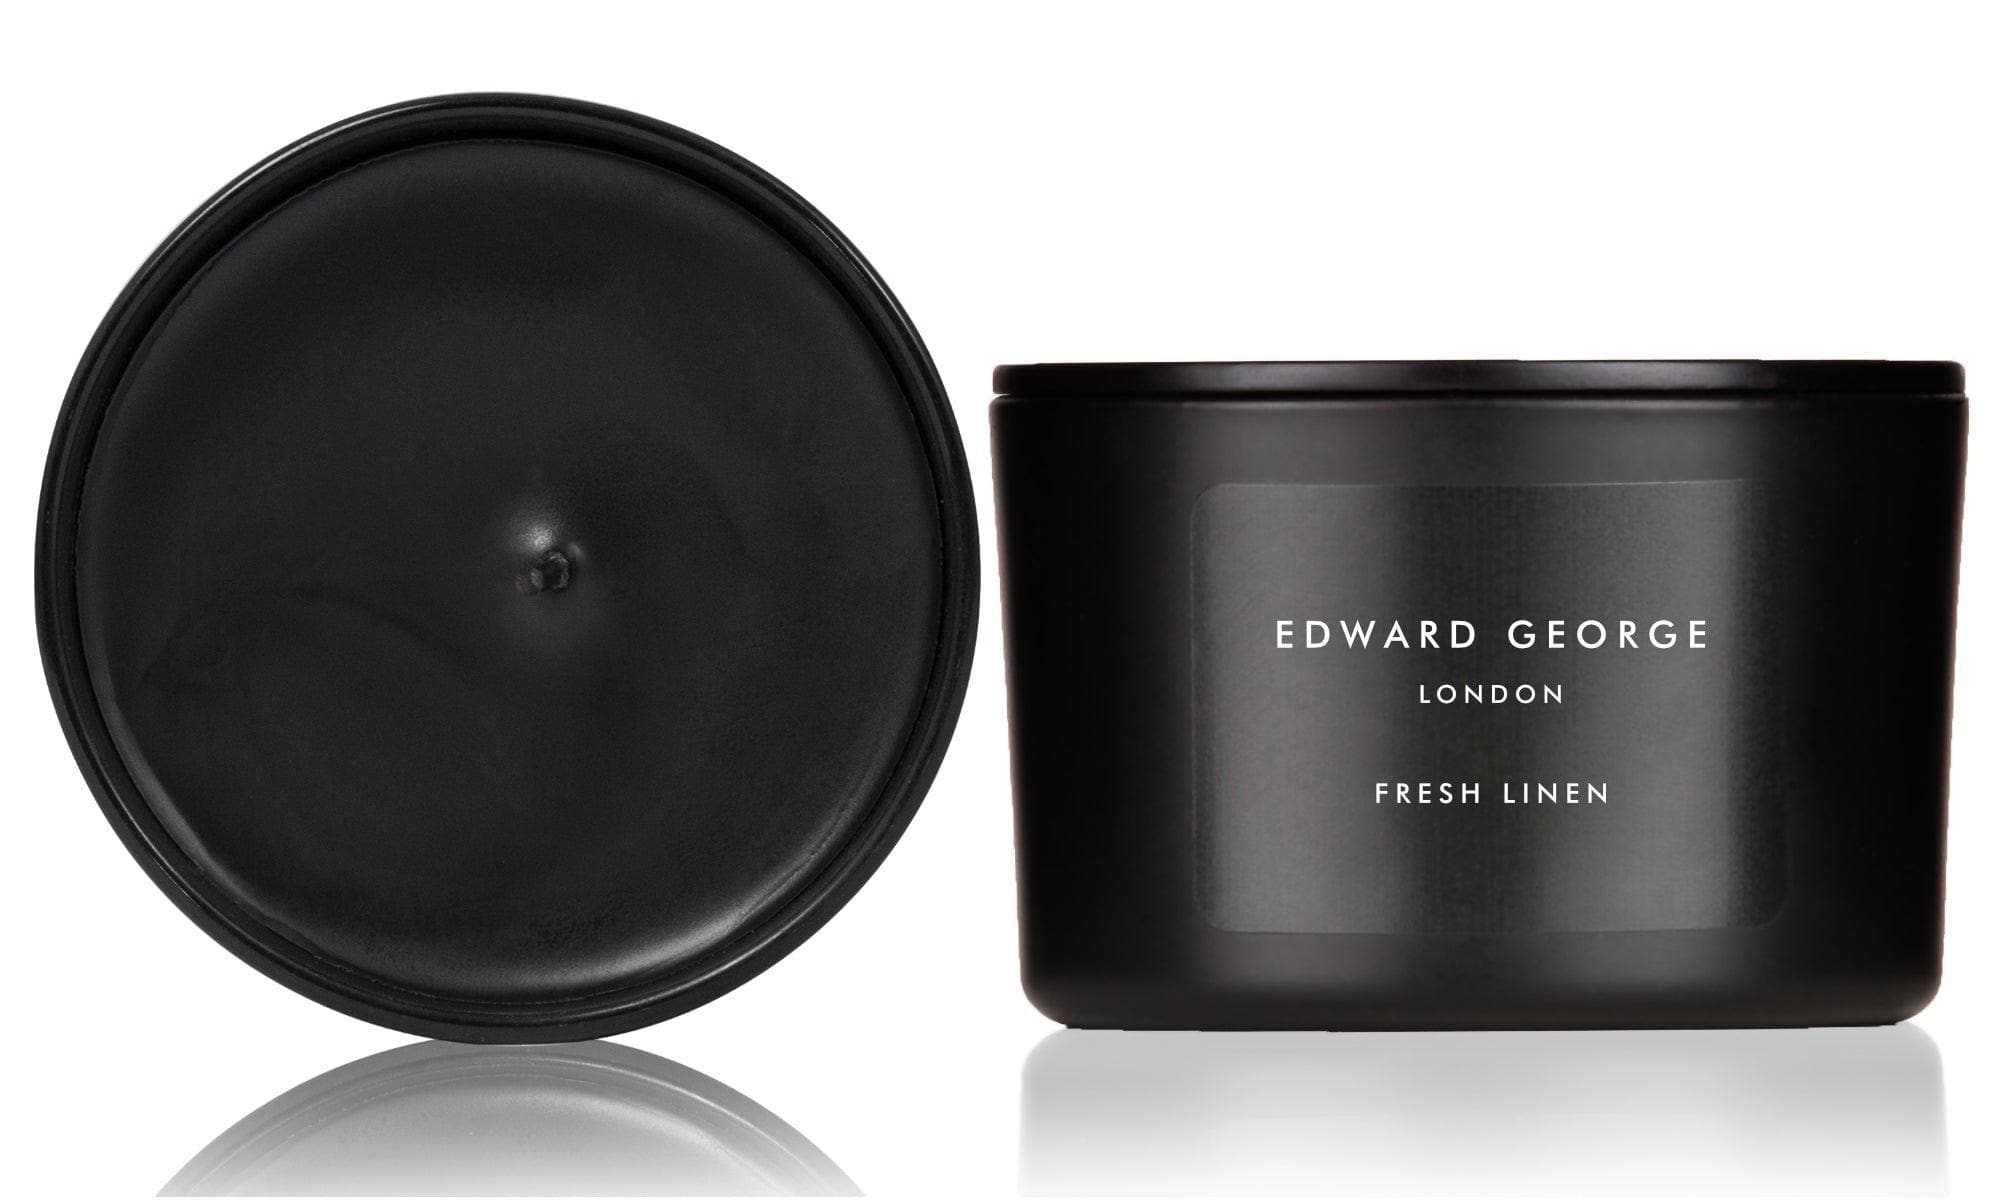 candles home fragrance decor room living room bedroom bathroom hallway kitchen study dinning edward george london luxury gift ritual scent set lid zinc alloy black wax beeswax mineral coconut parafin best black wax scented candle women men small